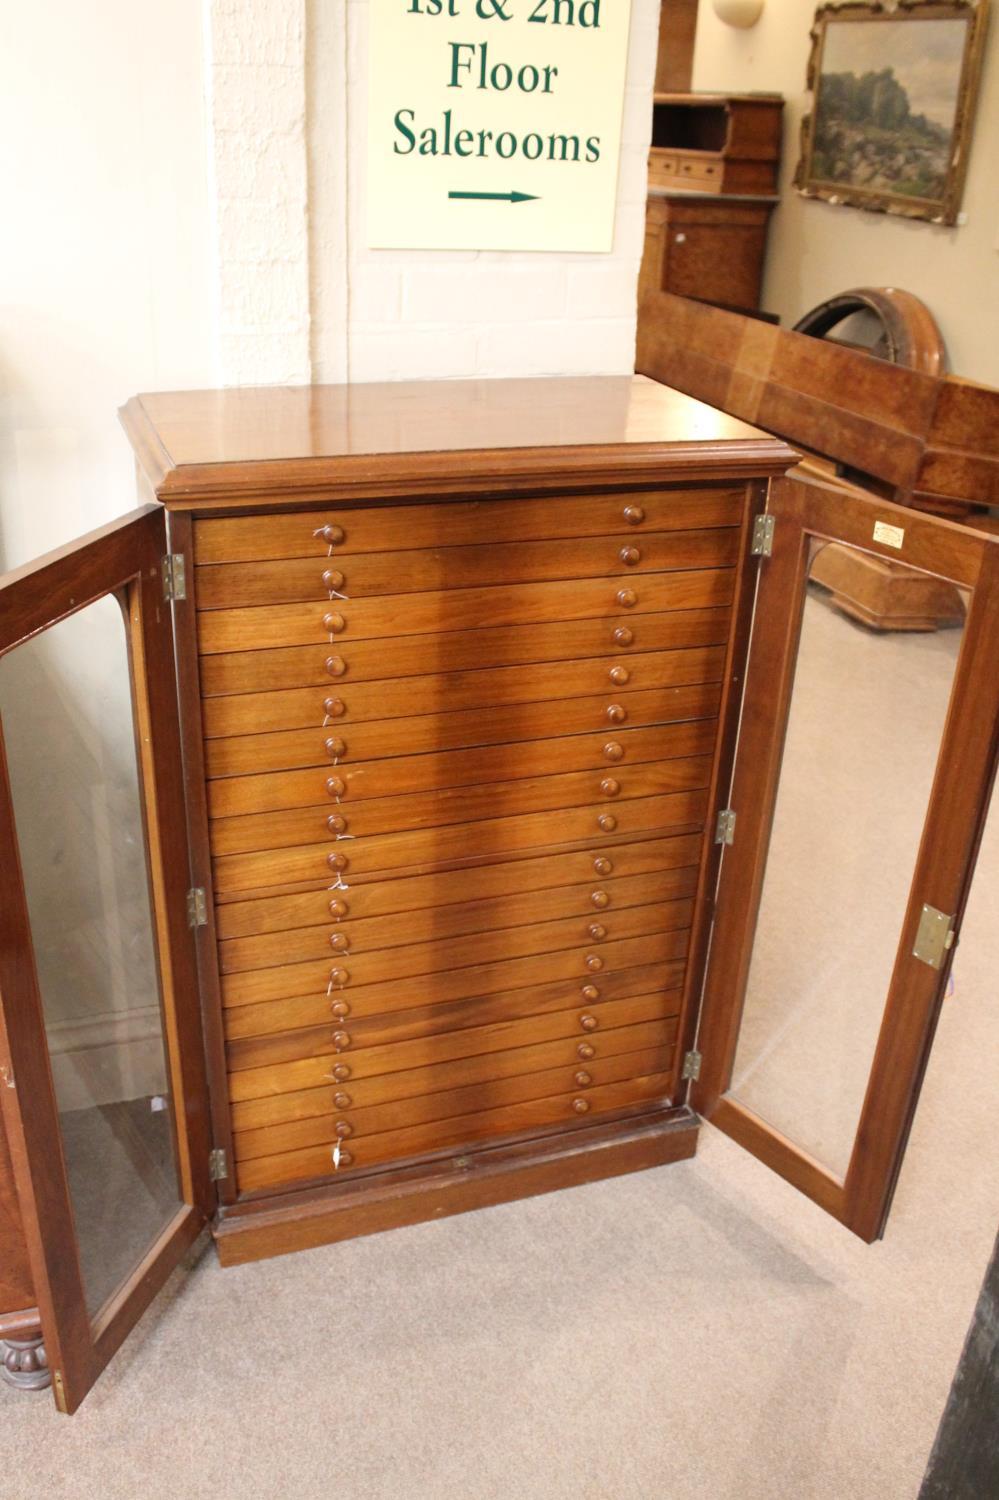 COLLECTORS CABINET BY WATKINS & DONCASTER - BUTTERFLIES & MOTHS a walnut collectors cabinet with - Image 4 of 23